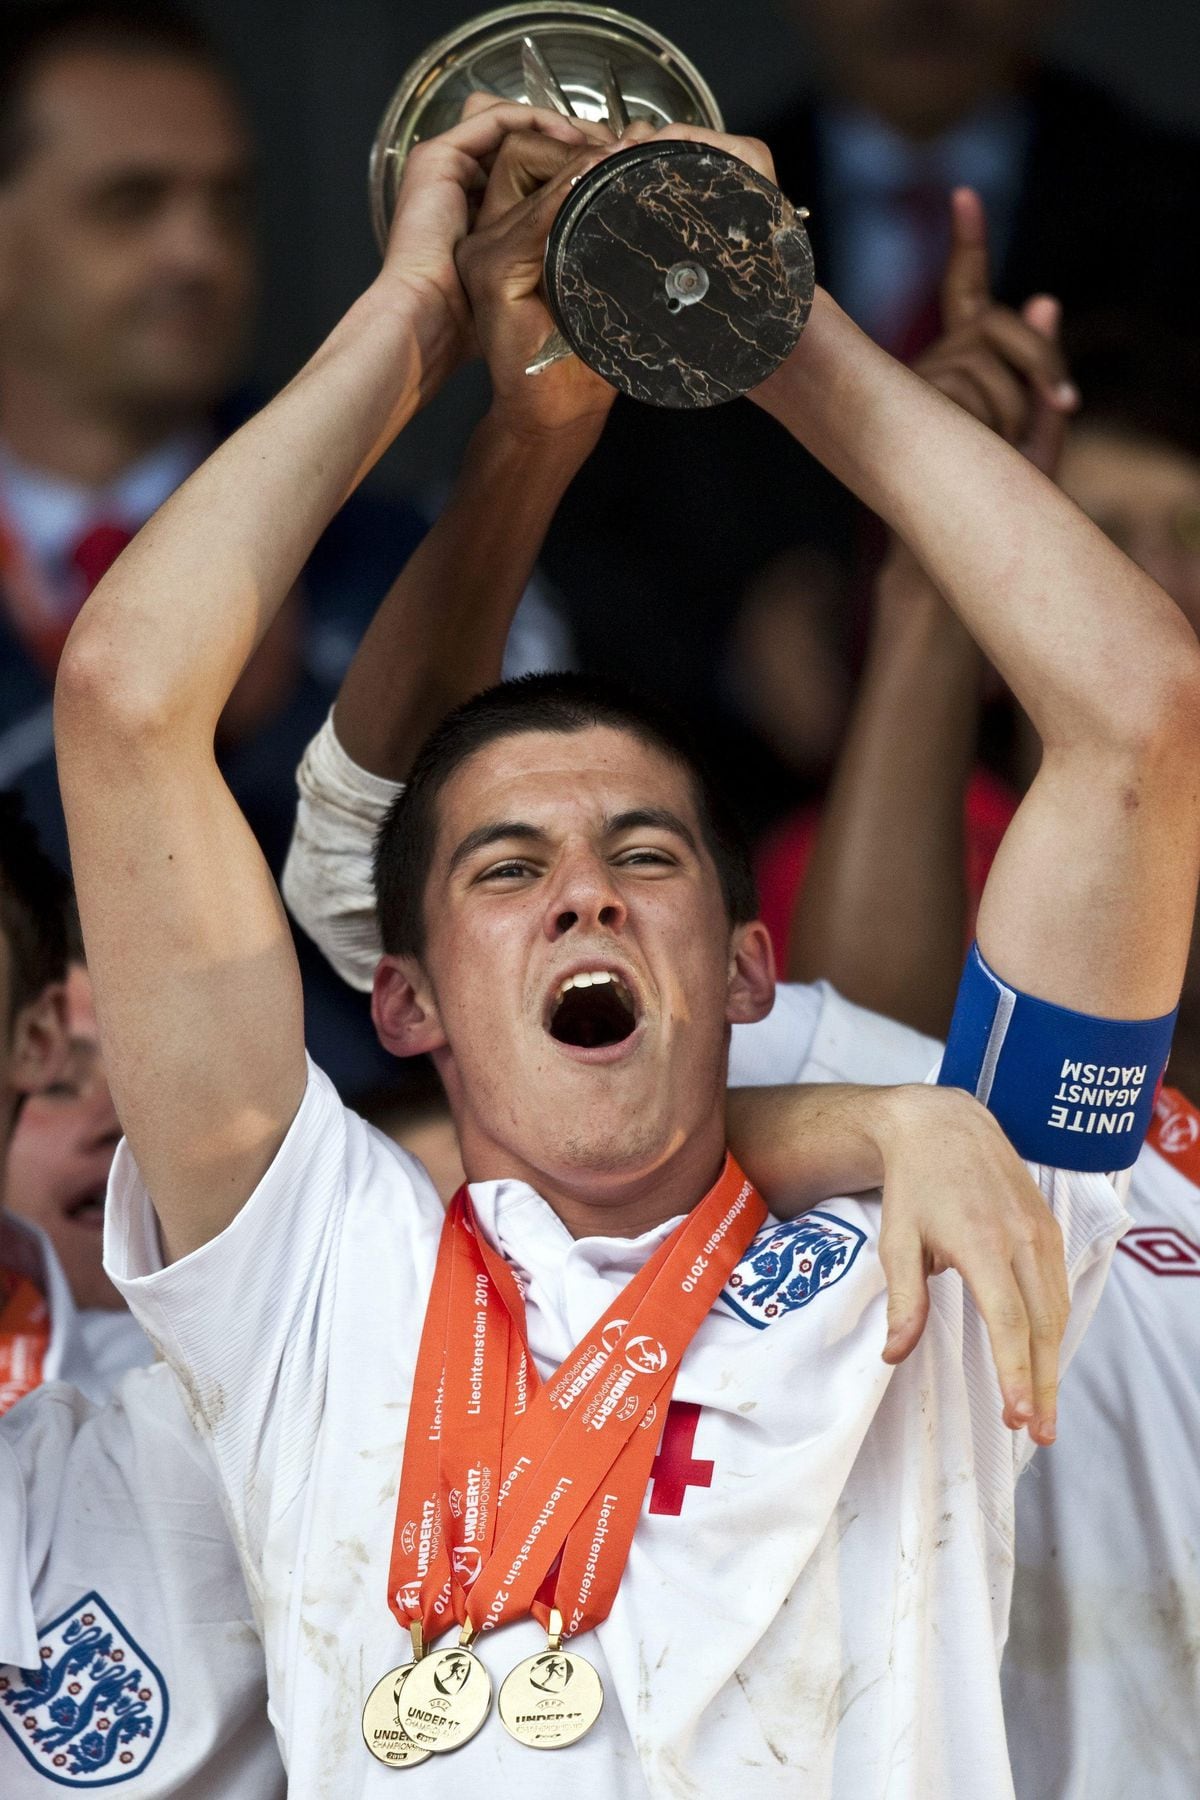 Coady won the European Under-17 Championship with England